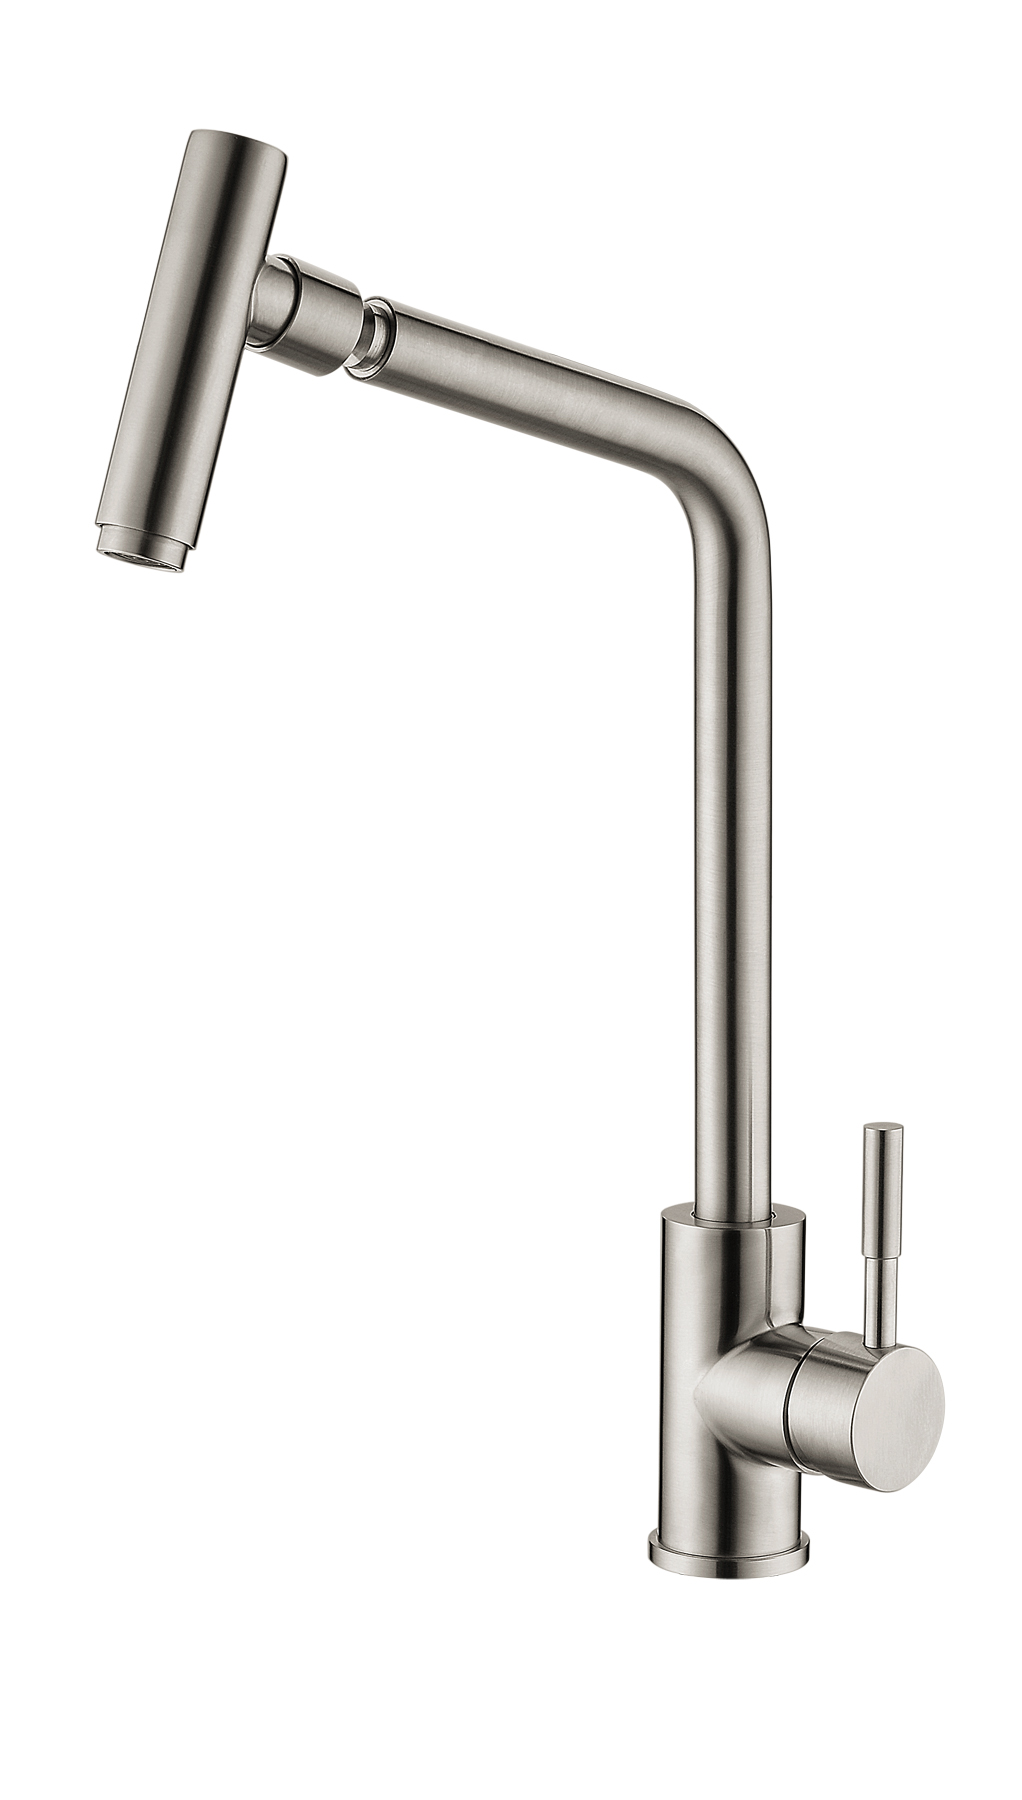 Single-hole faucet Kitchen faucet Stainless steel double-mode taps